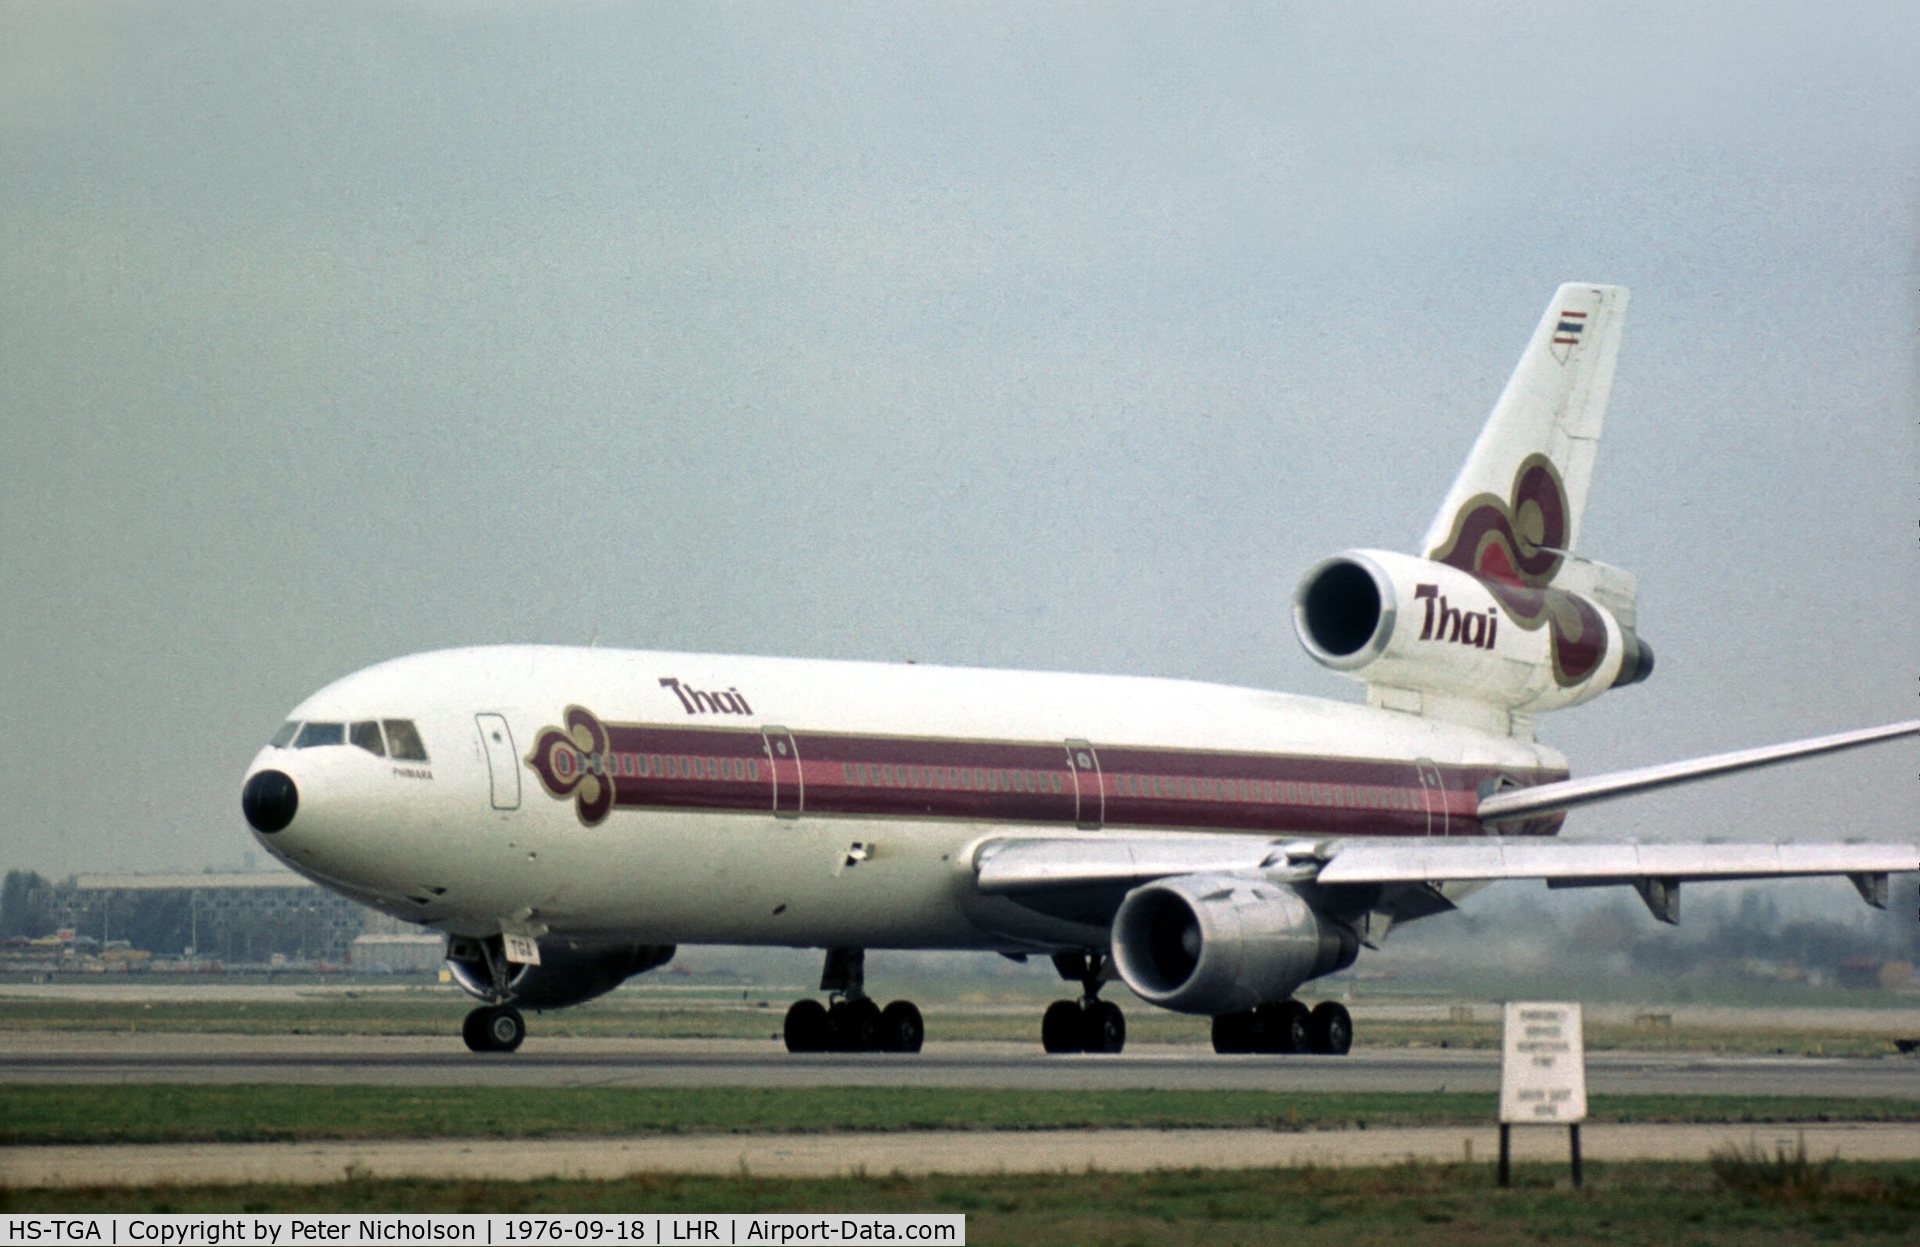 HS-TGA, 1973 Douglas DC-10-30 C/N 46851, Thai Airways Intnl leased this DC-10 from UTA as seen at London Heathrow in the late Summer of 1976.  The same regn was later used for a Boeing 747.